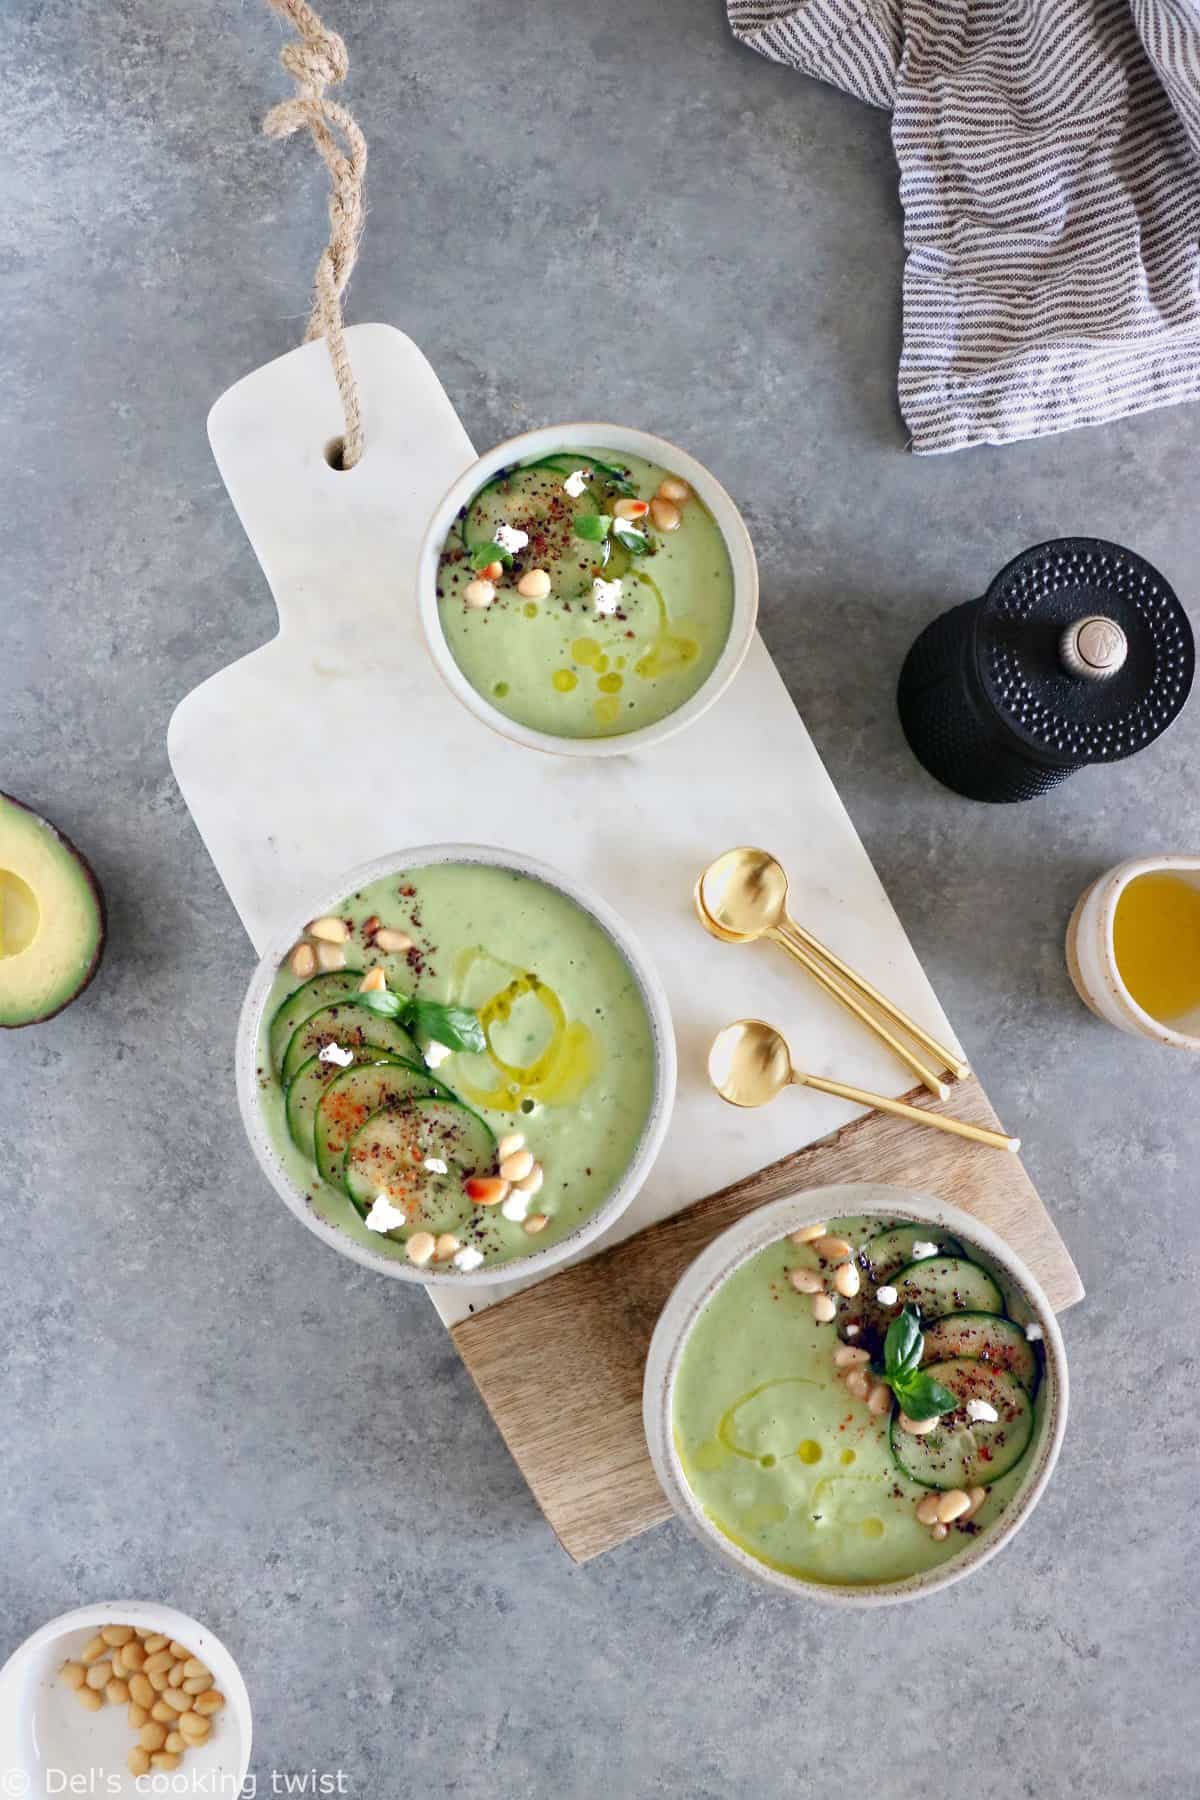 This chilled cucumber avocado gazpacho with goat cheese is an easy cold summer soup.